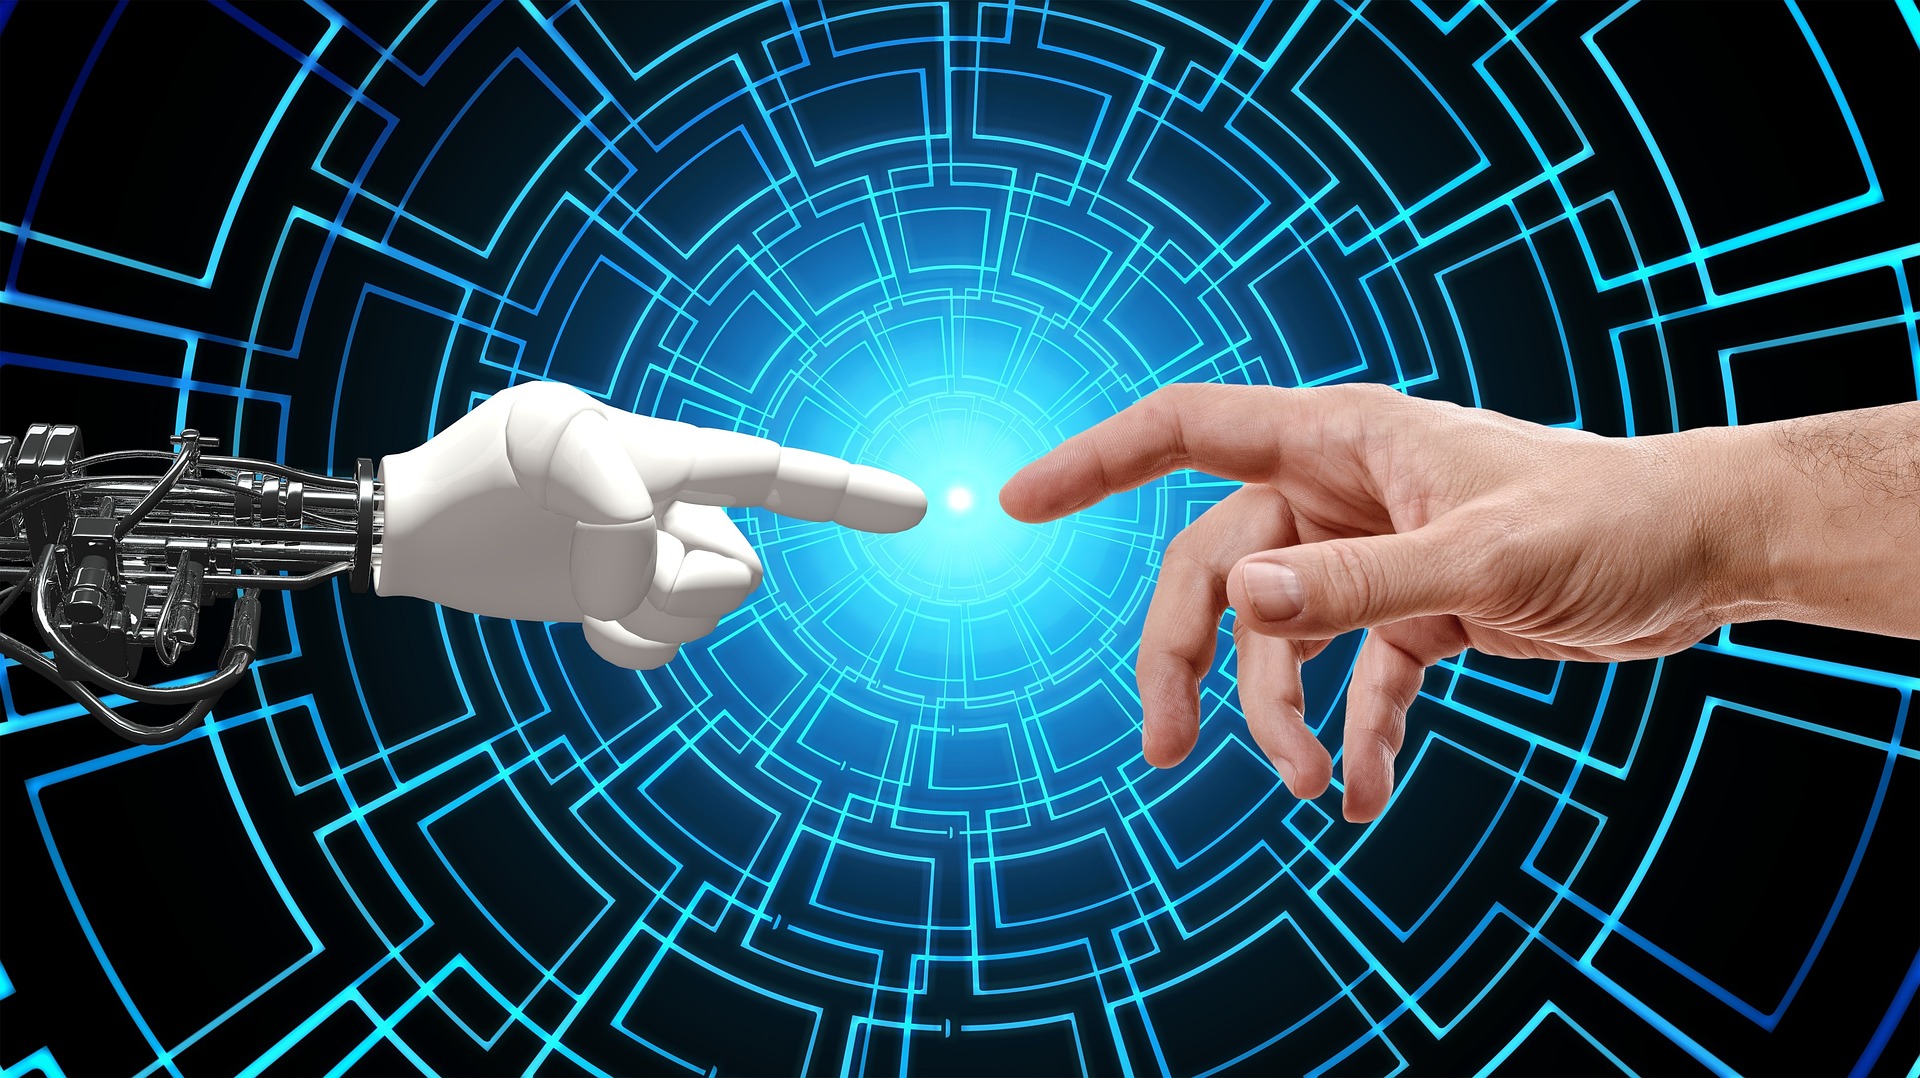 https://thebulletin.org/wp-content/uploads/2023/09/Robot-and-human-hands-touching-L-150x150.jpg